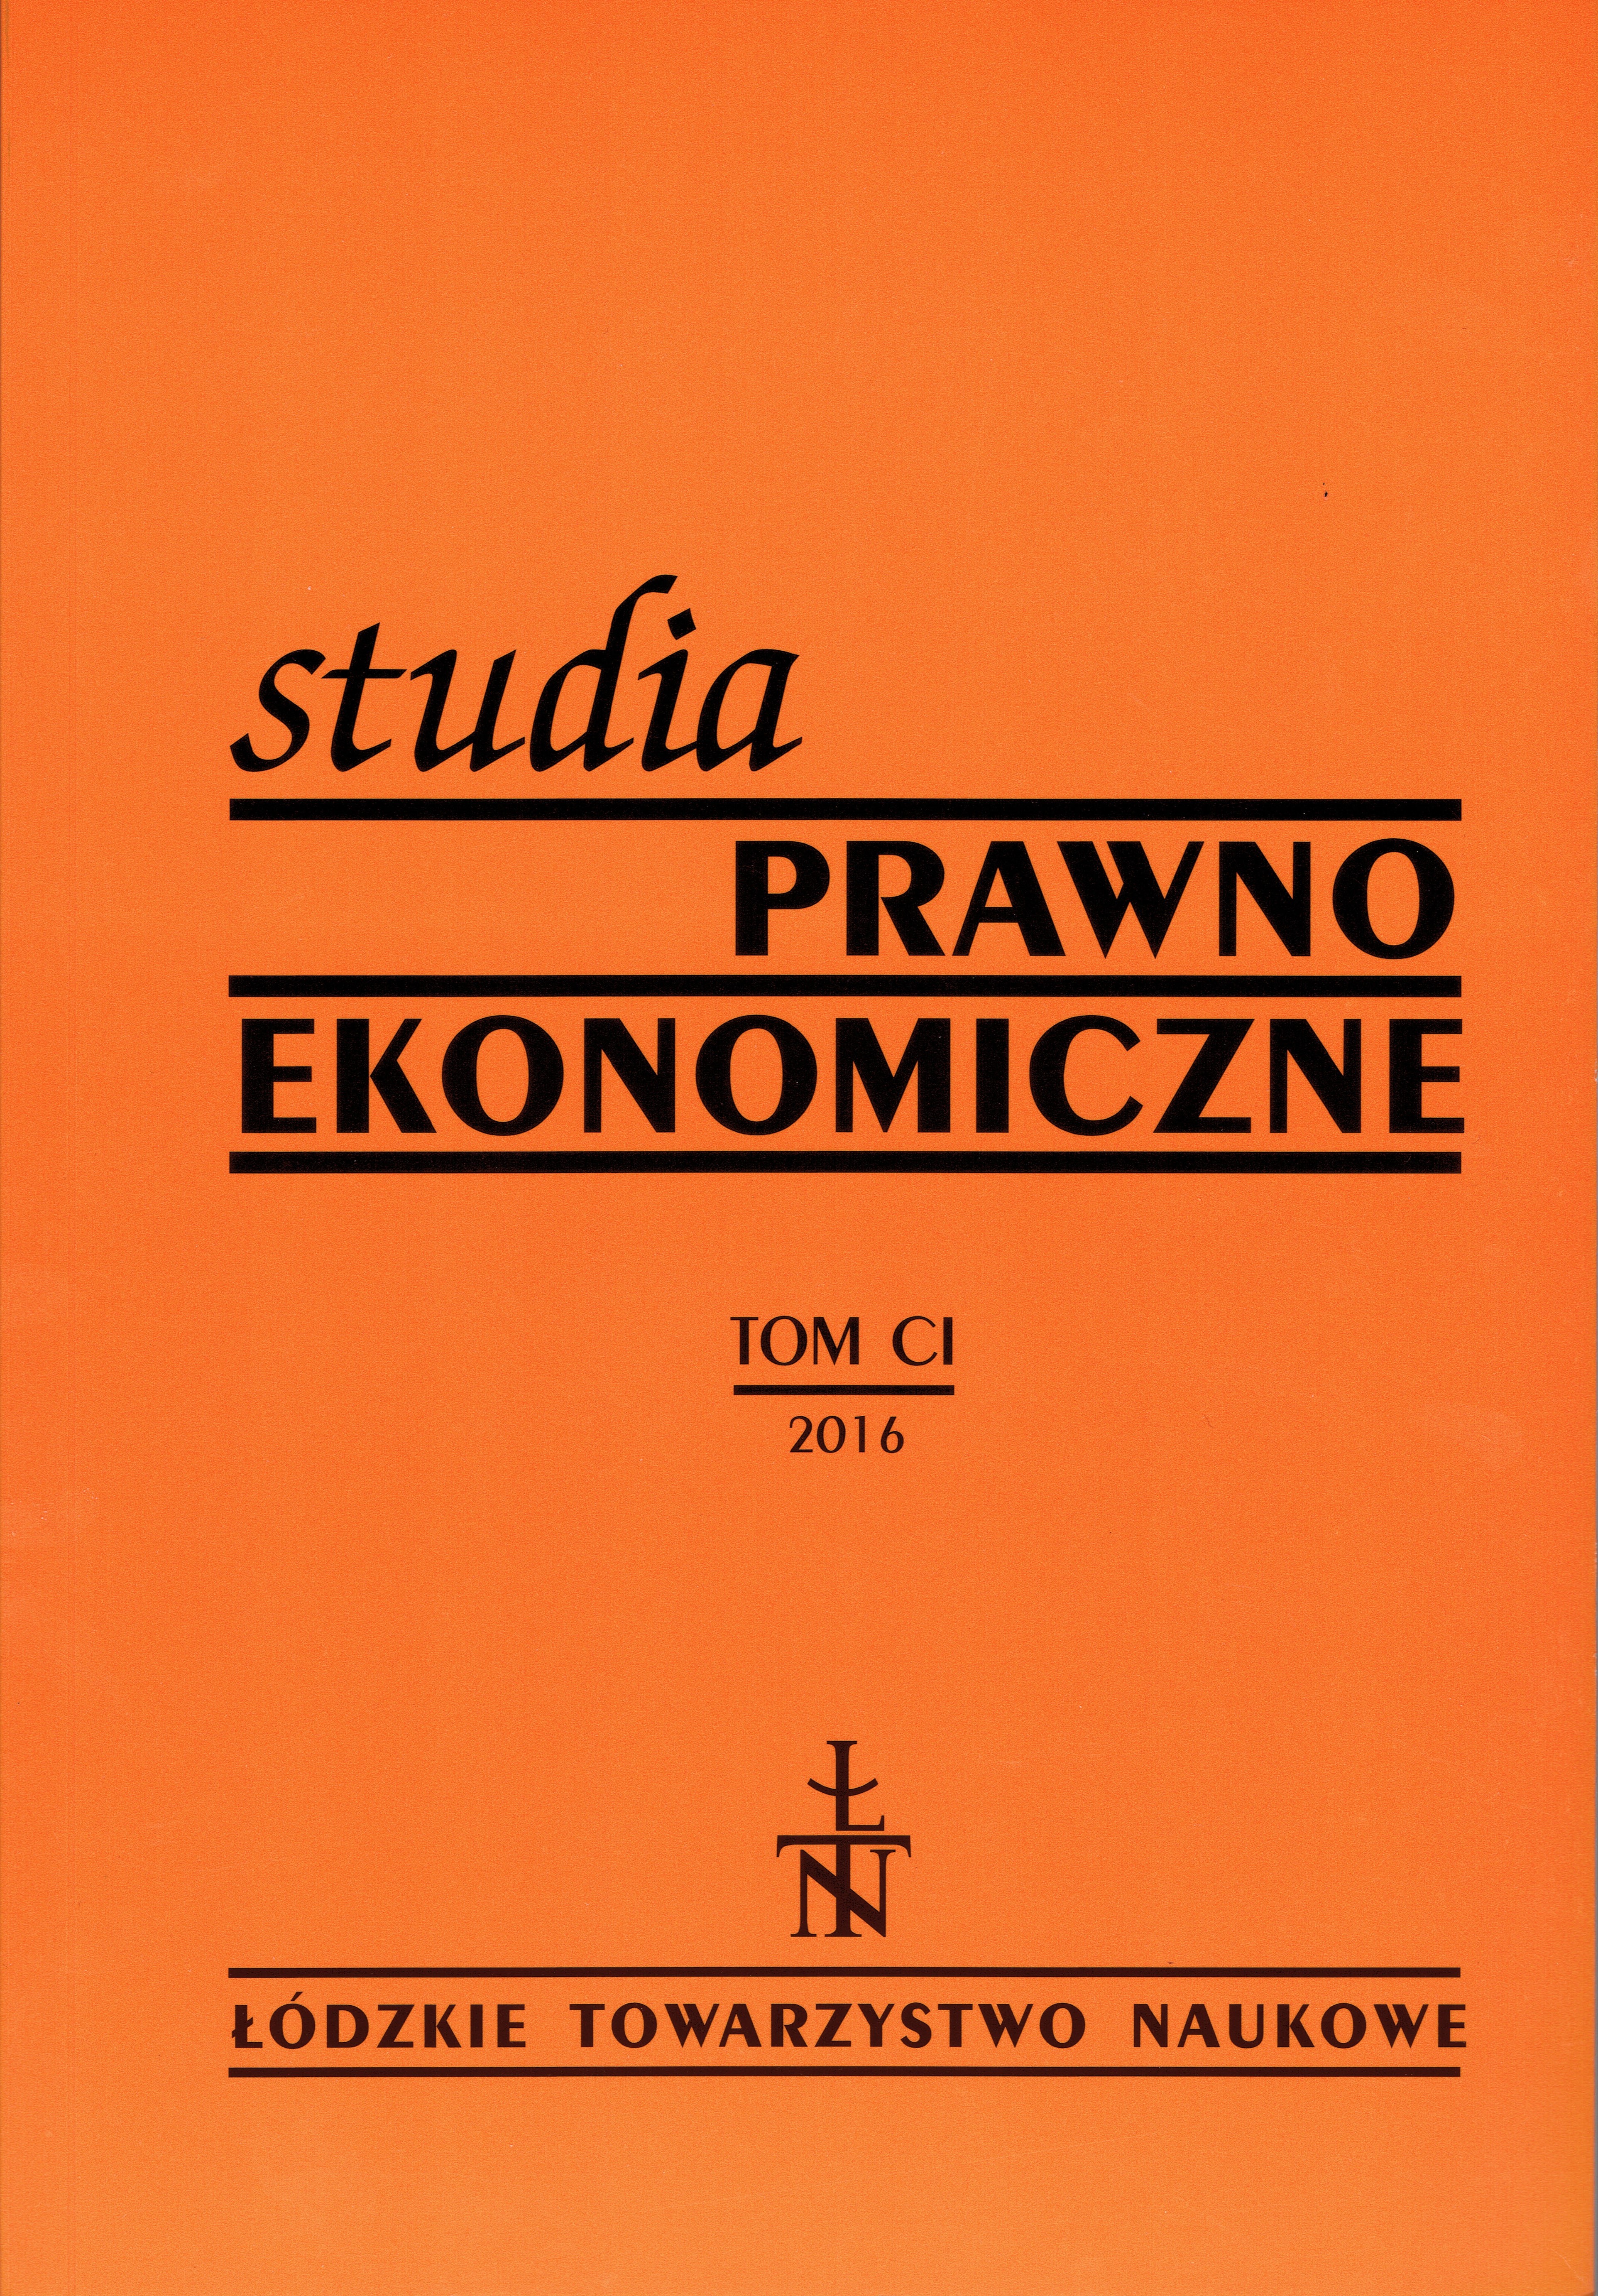 Dilemmas for Poland of the Accession to the Banking Union Cover Image